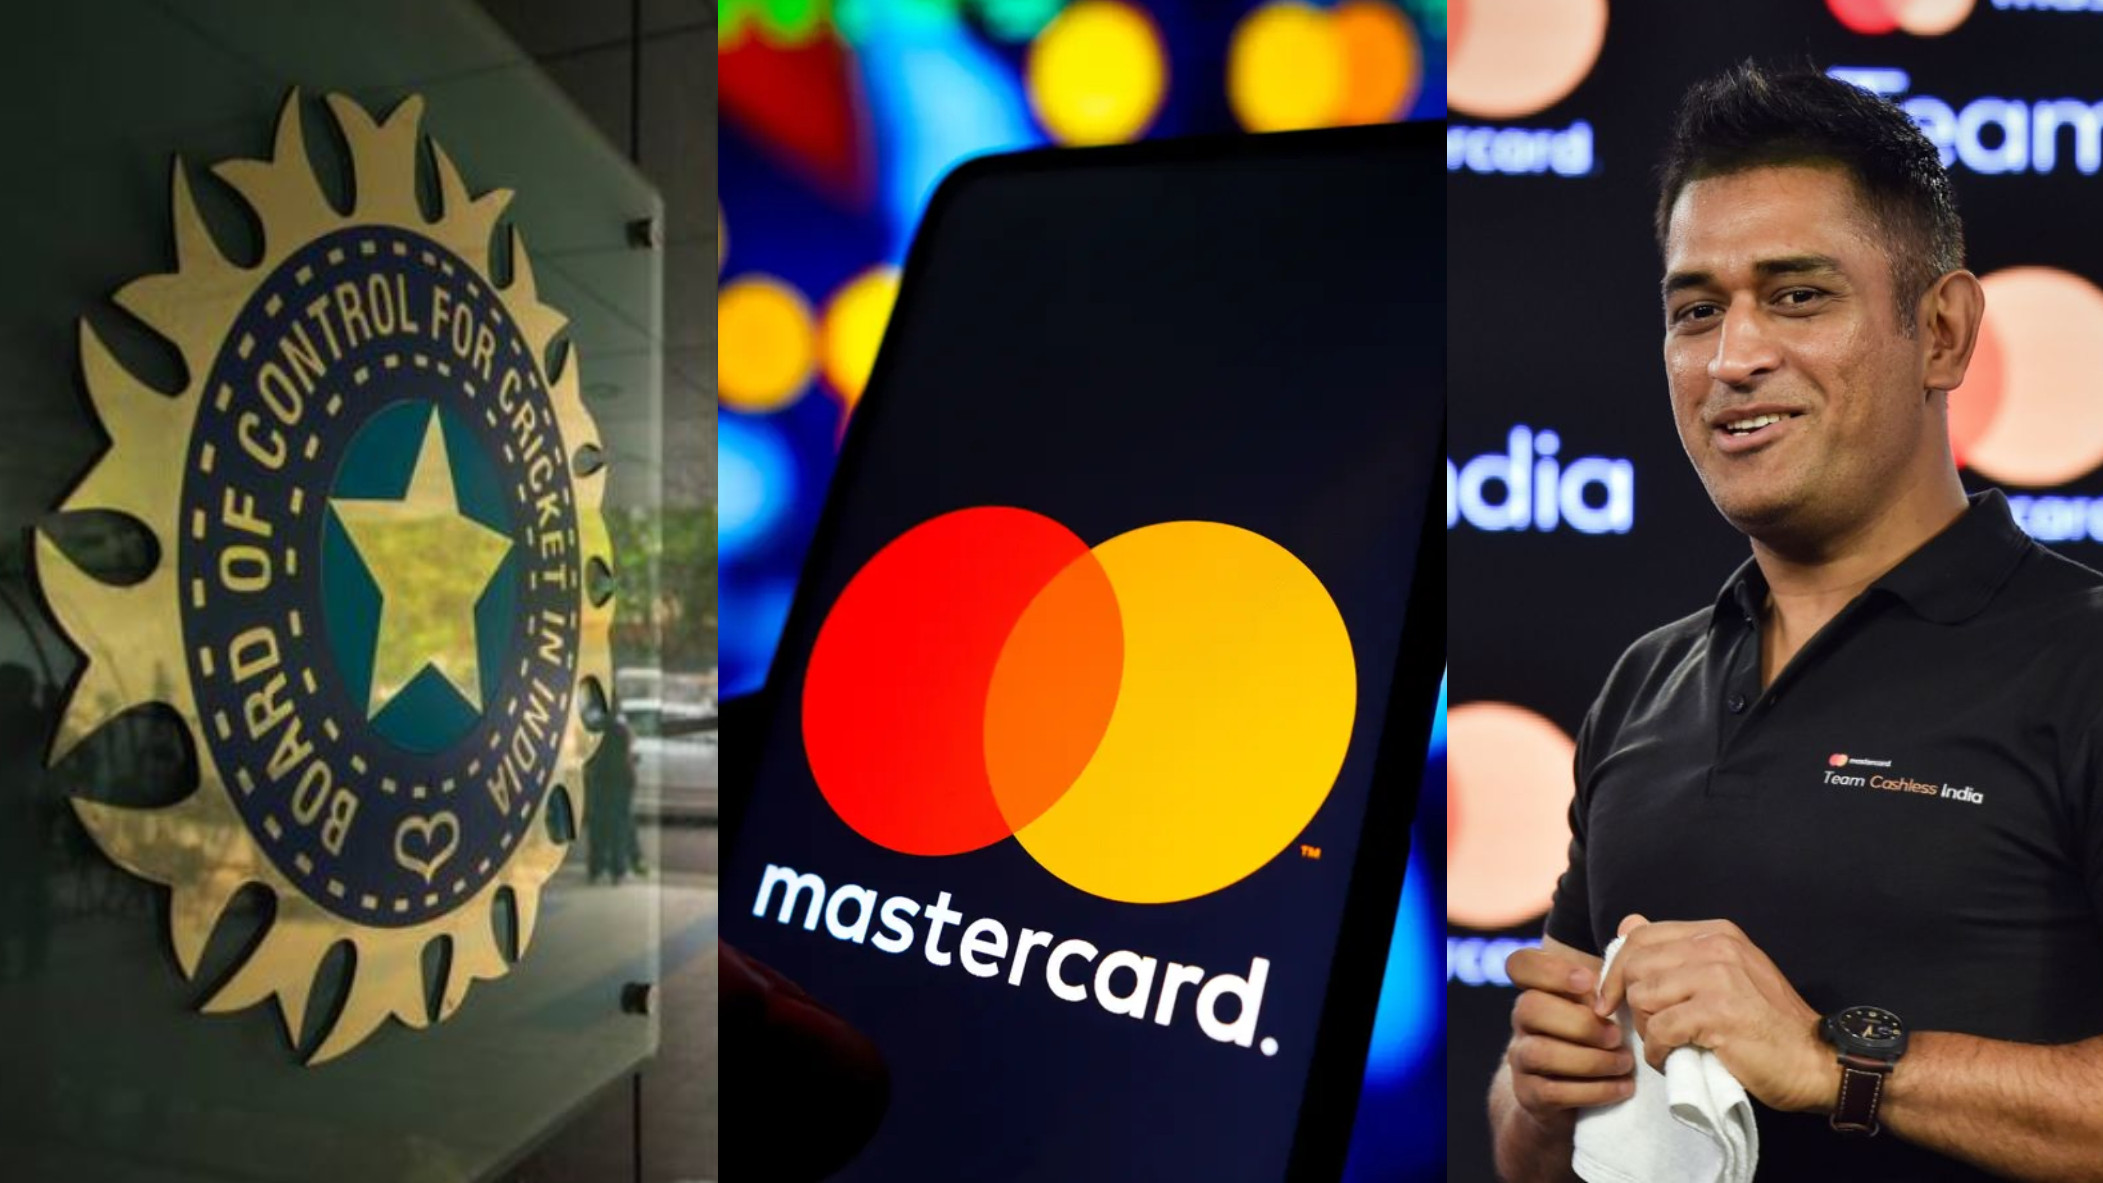 Mastercard becomes title sponsor for India's international matches and domestic cricket; brand ambassador MS Dhoni reacts